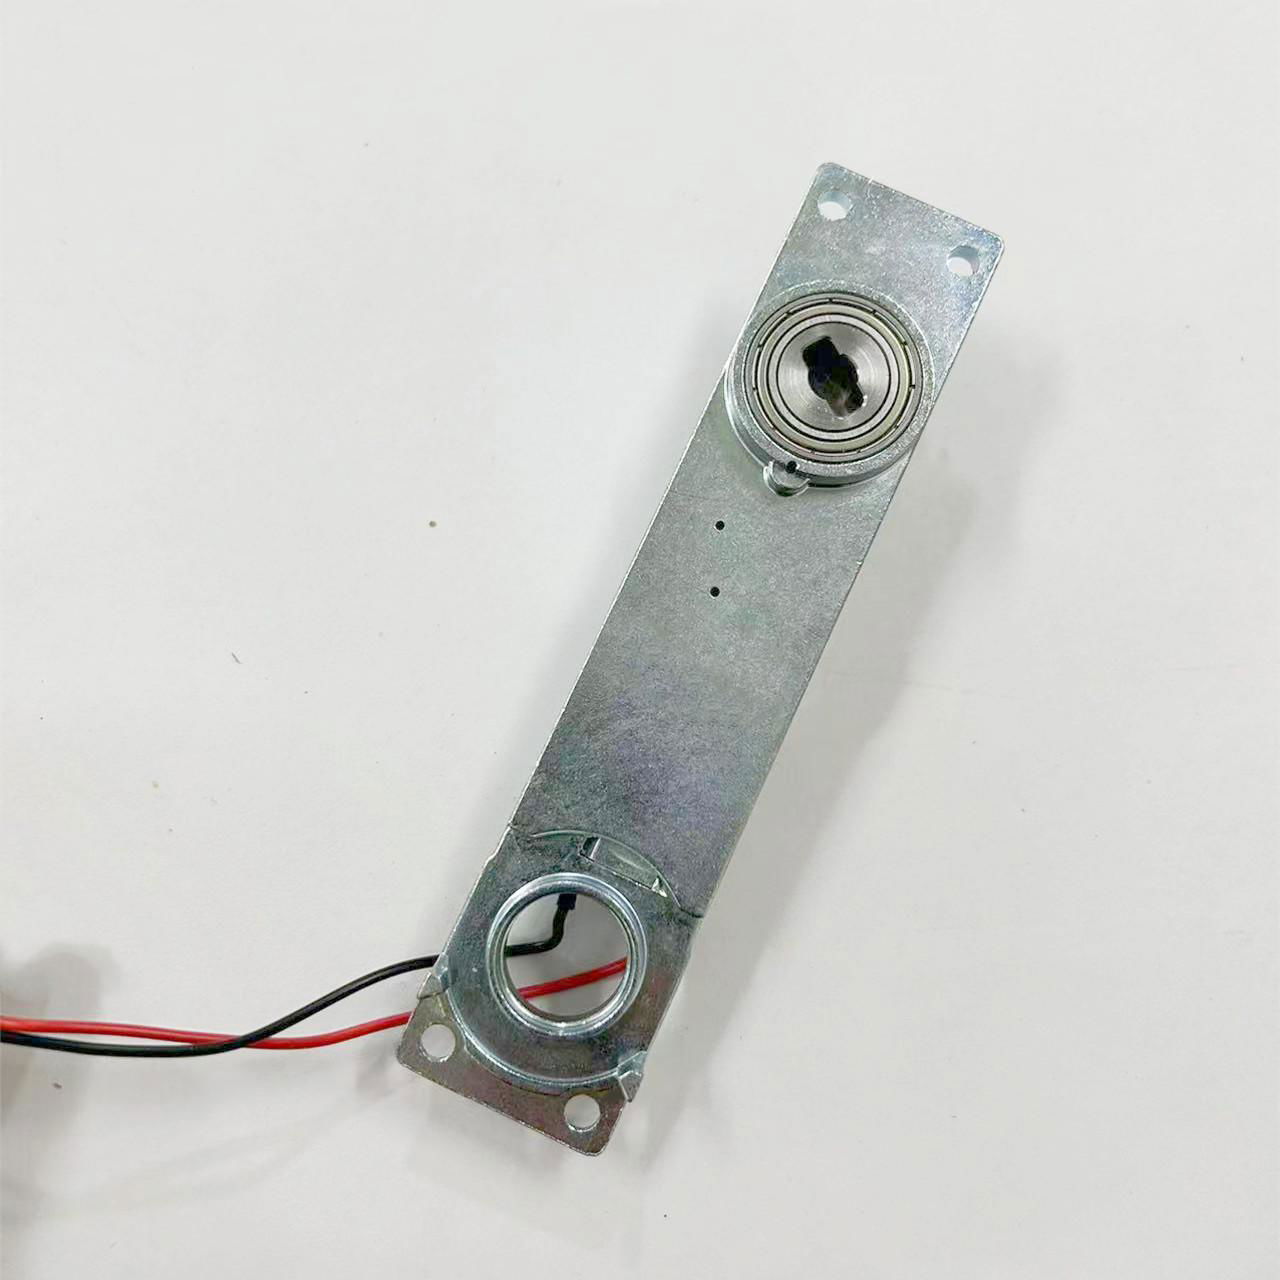 Geared motors are used for fingerprint locks for doors and windows